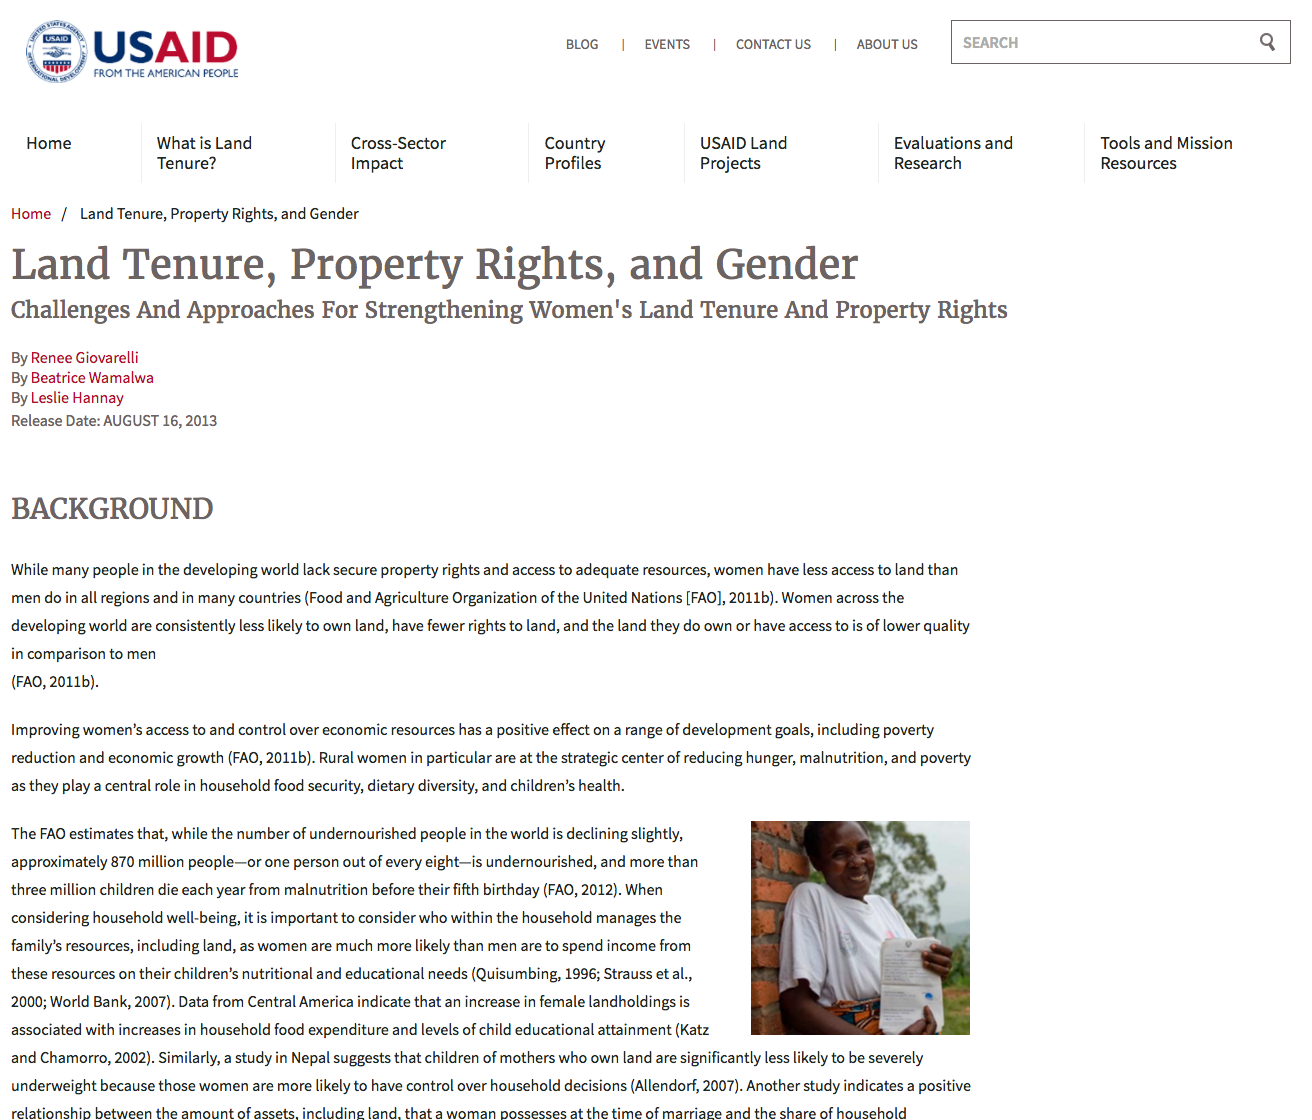 Land Tenure, Property Rights, and Gender cover